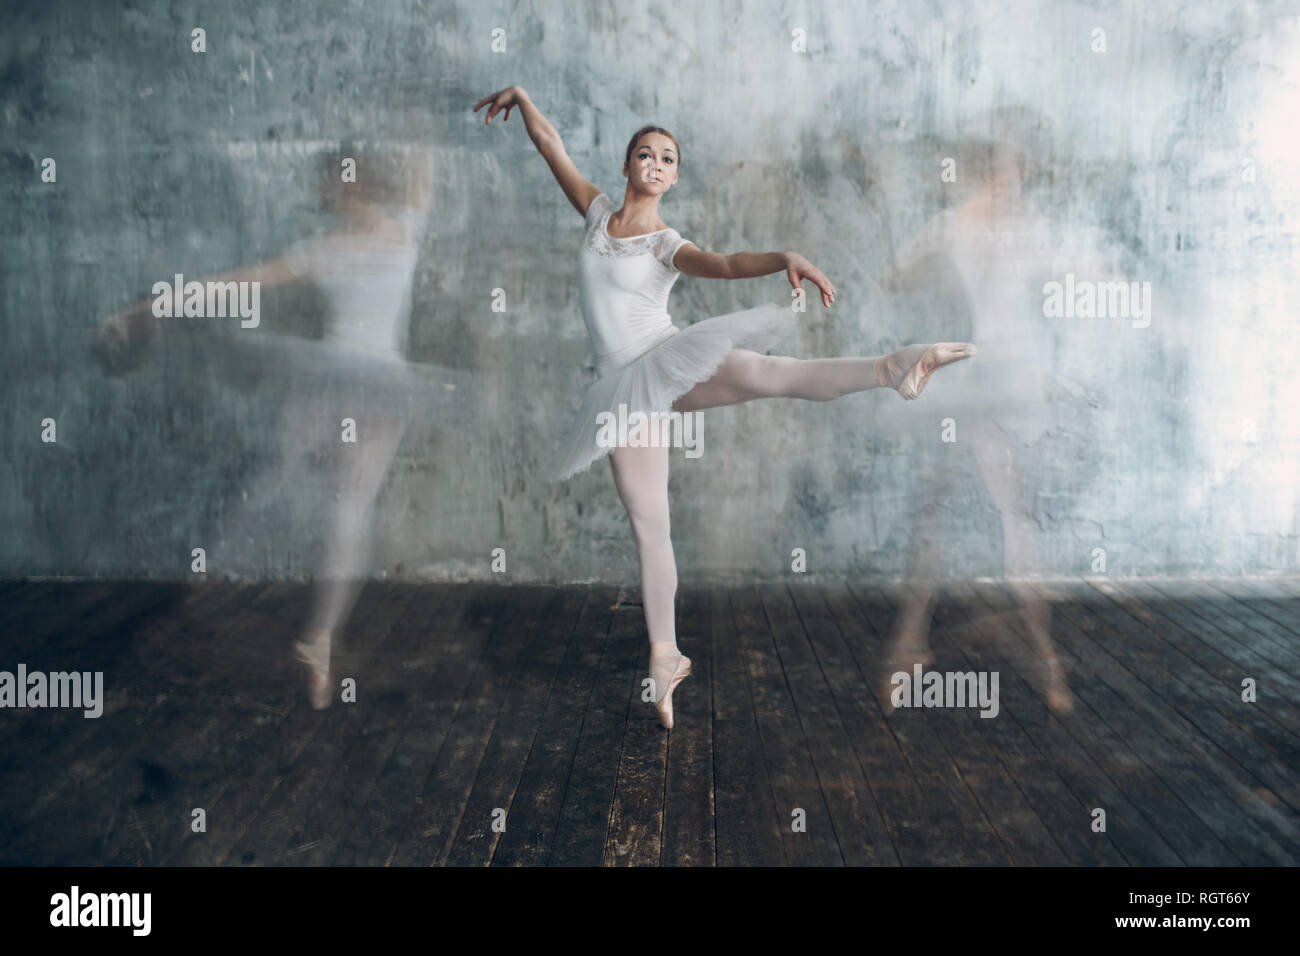 Ballerina female. Young beautiful woman ballet dancer, dressed in professional outfit, pointe shoes and white tutu. Multiple exposure. Stock Photo